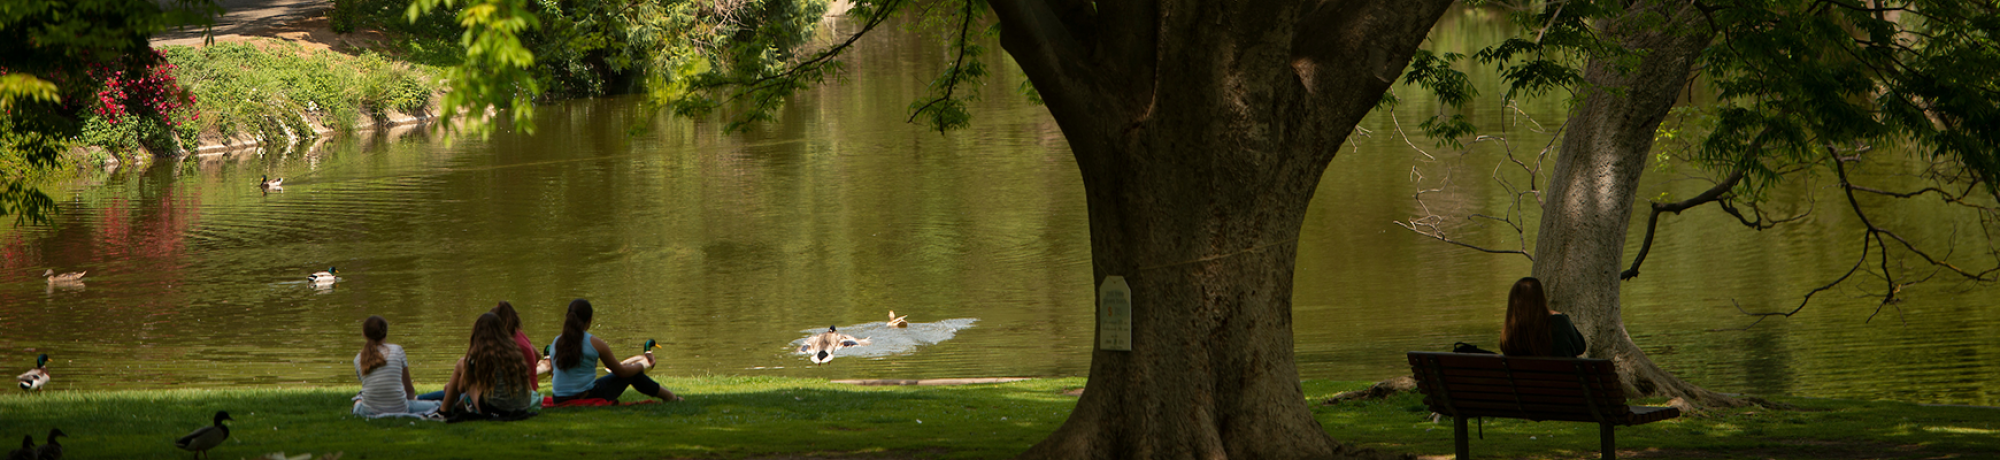 Students relax in the shade of a large tree by Lake Spafford in the Arboretum as ducks swim in the lake.  The spring weather is warm for students to study on the grass.